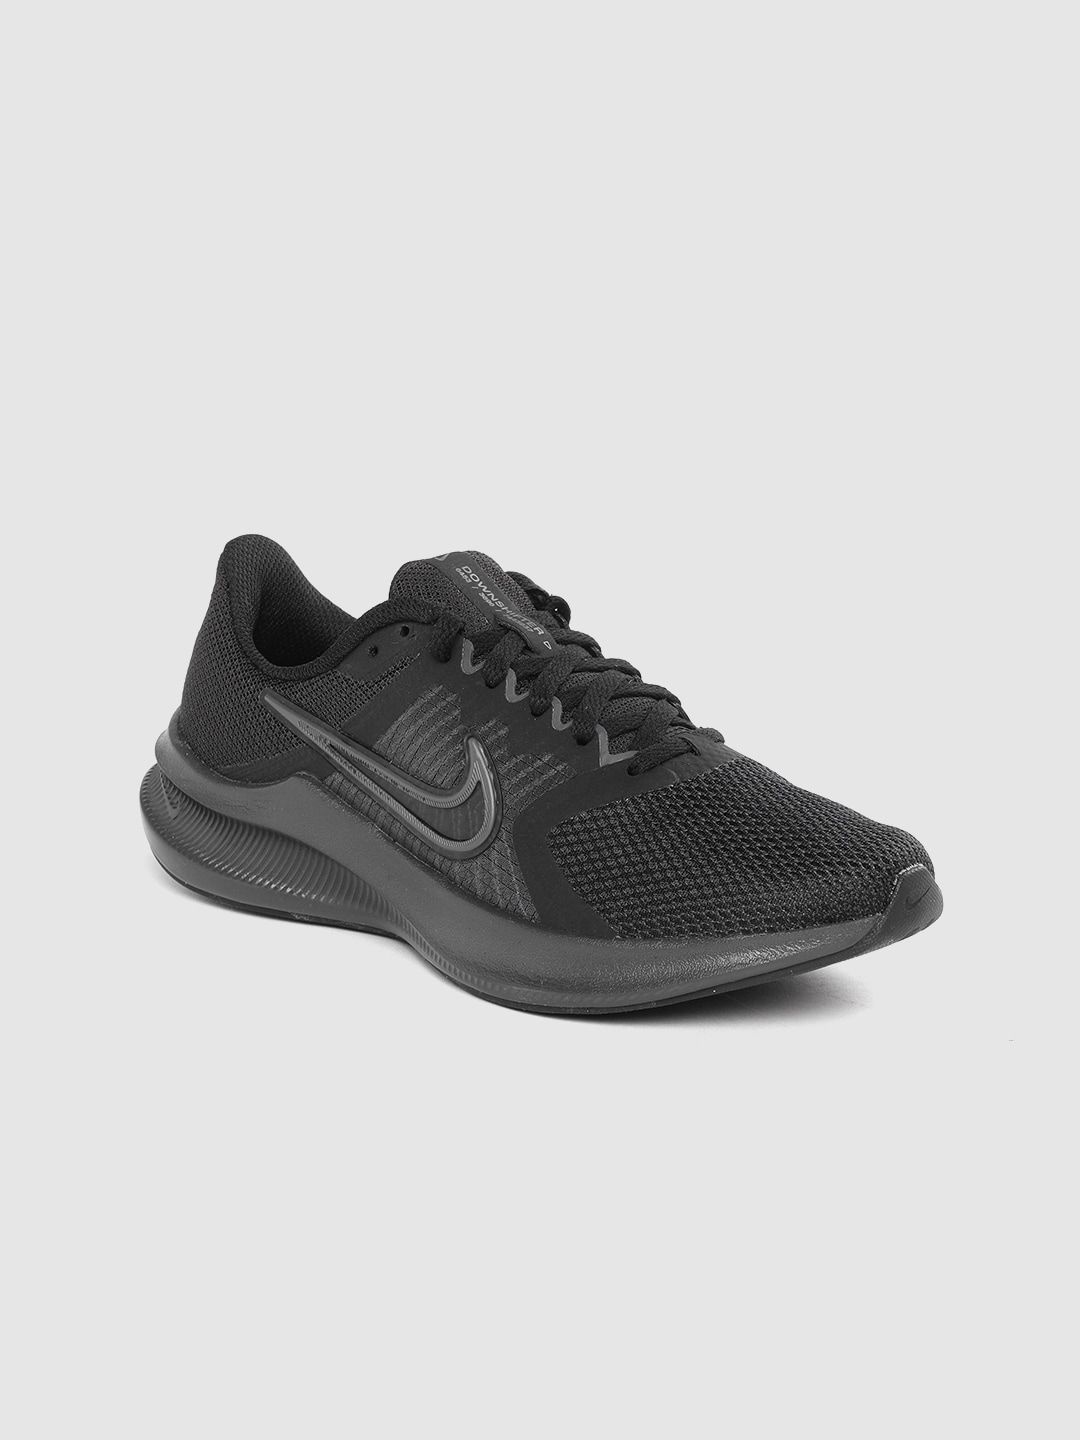 Nike Women Black Woven Design Down Shifter 11 Running Shoes Price in India